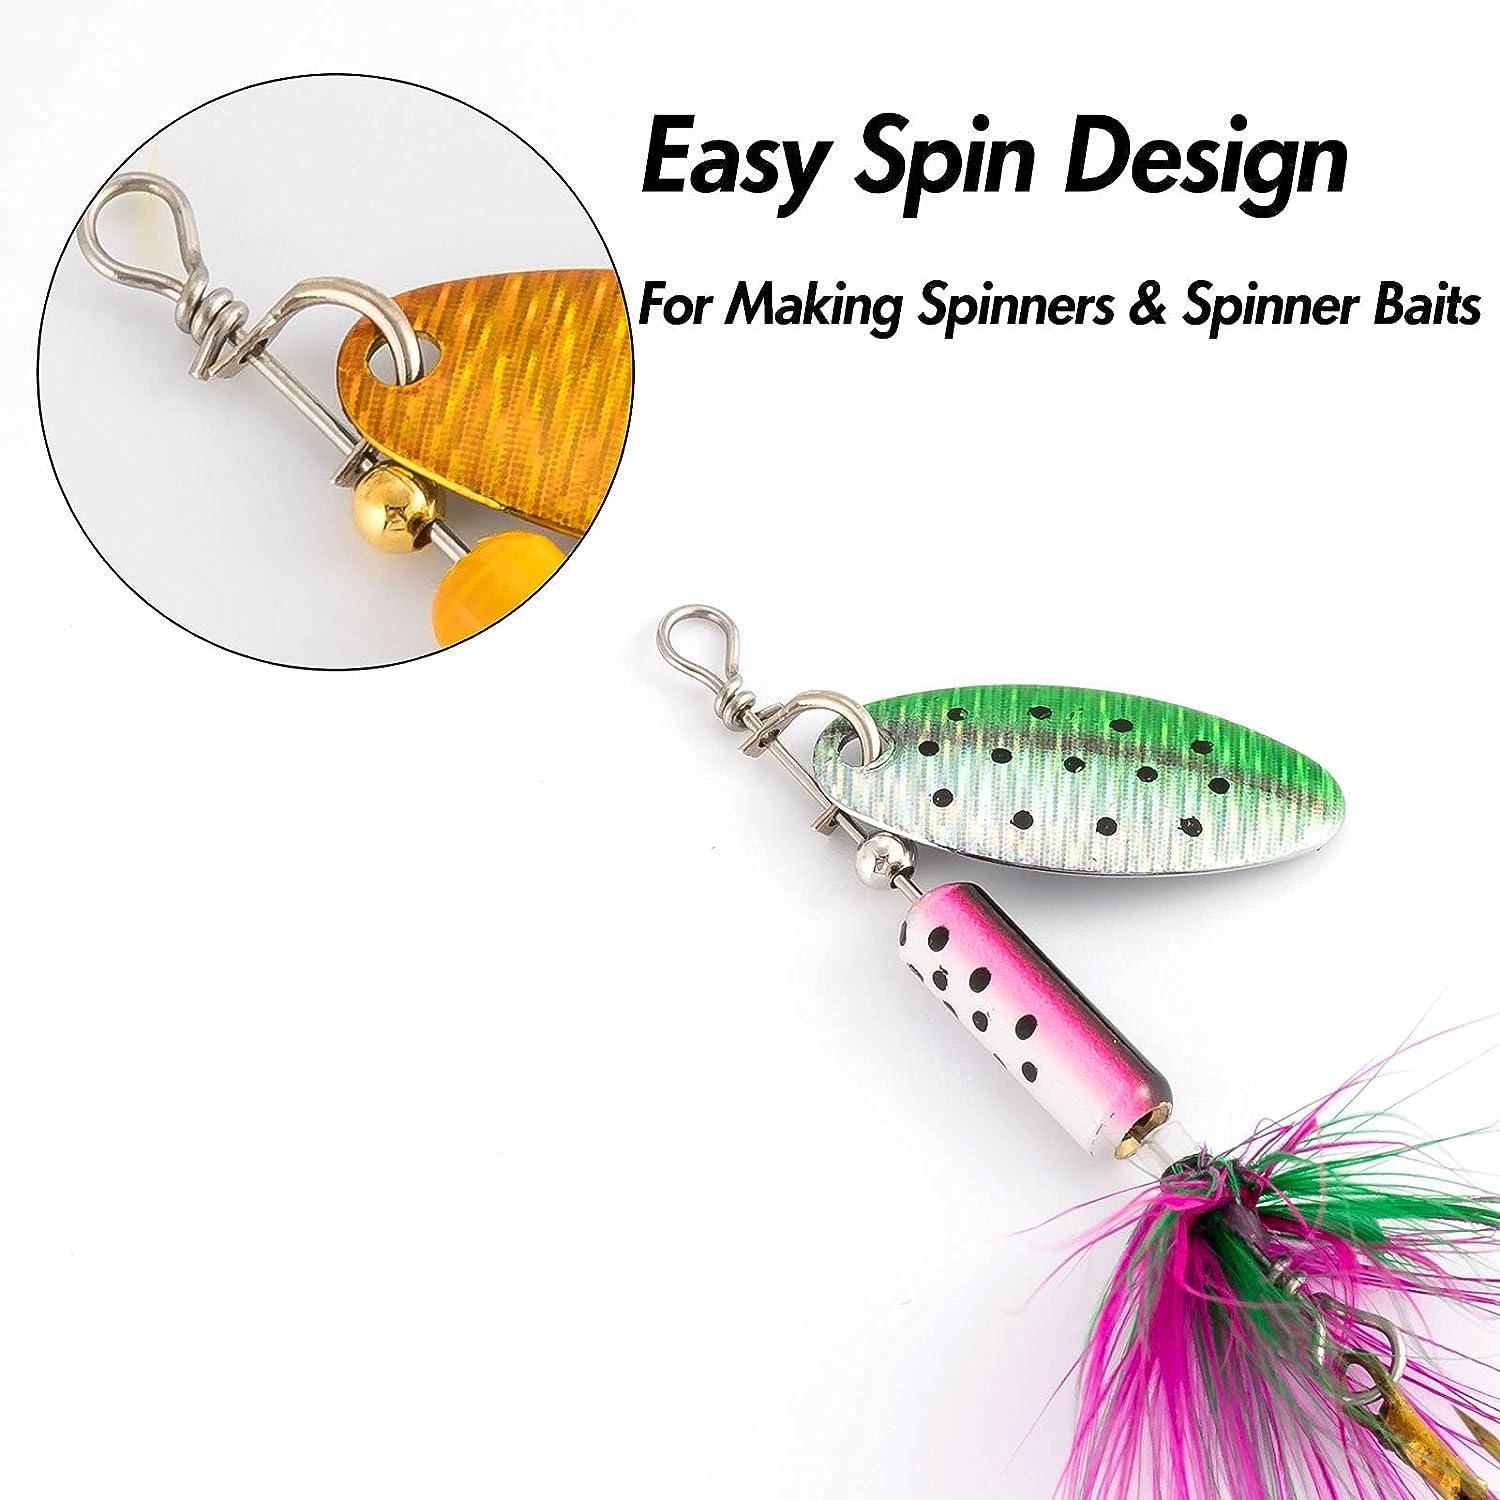 Part 2 - How To Make Your Own DIY Custom Fishing Spinners: How To